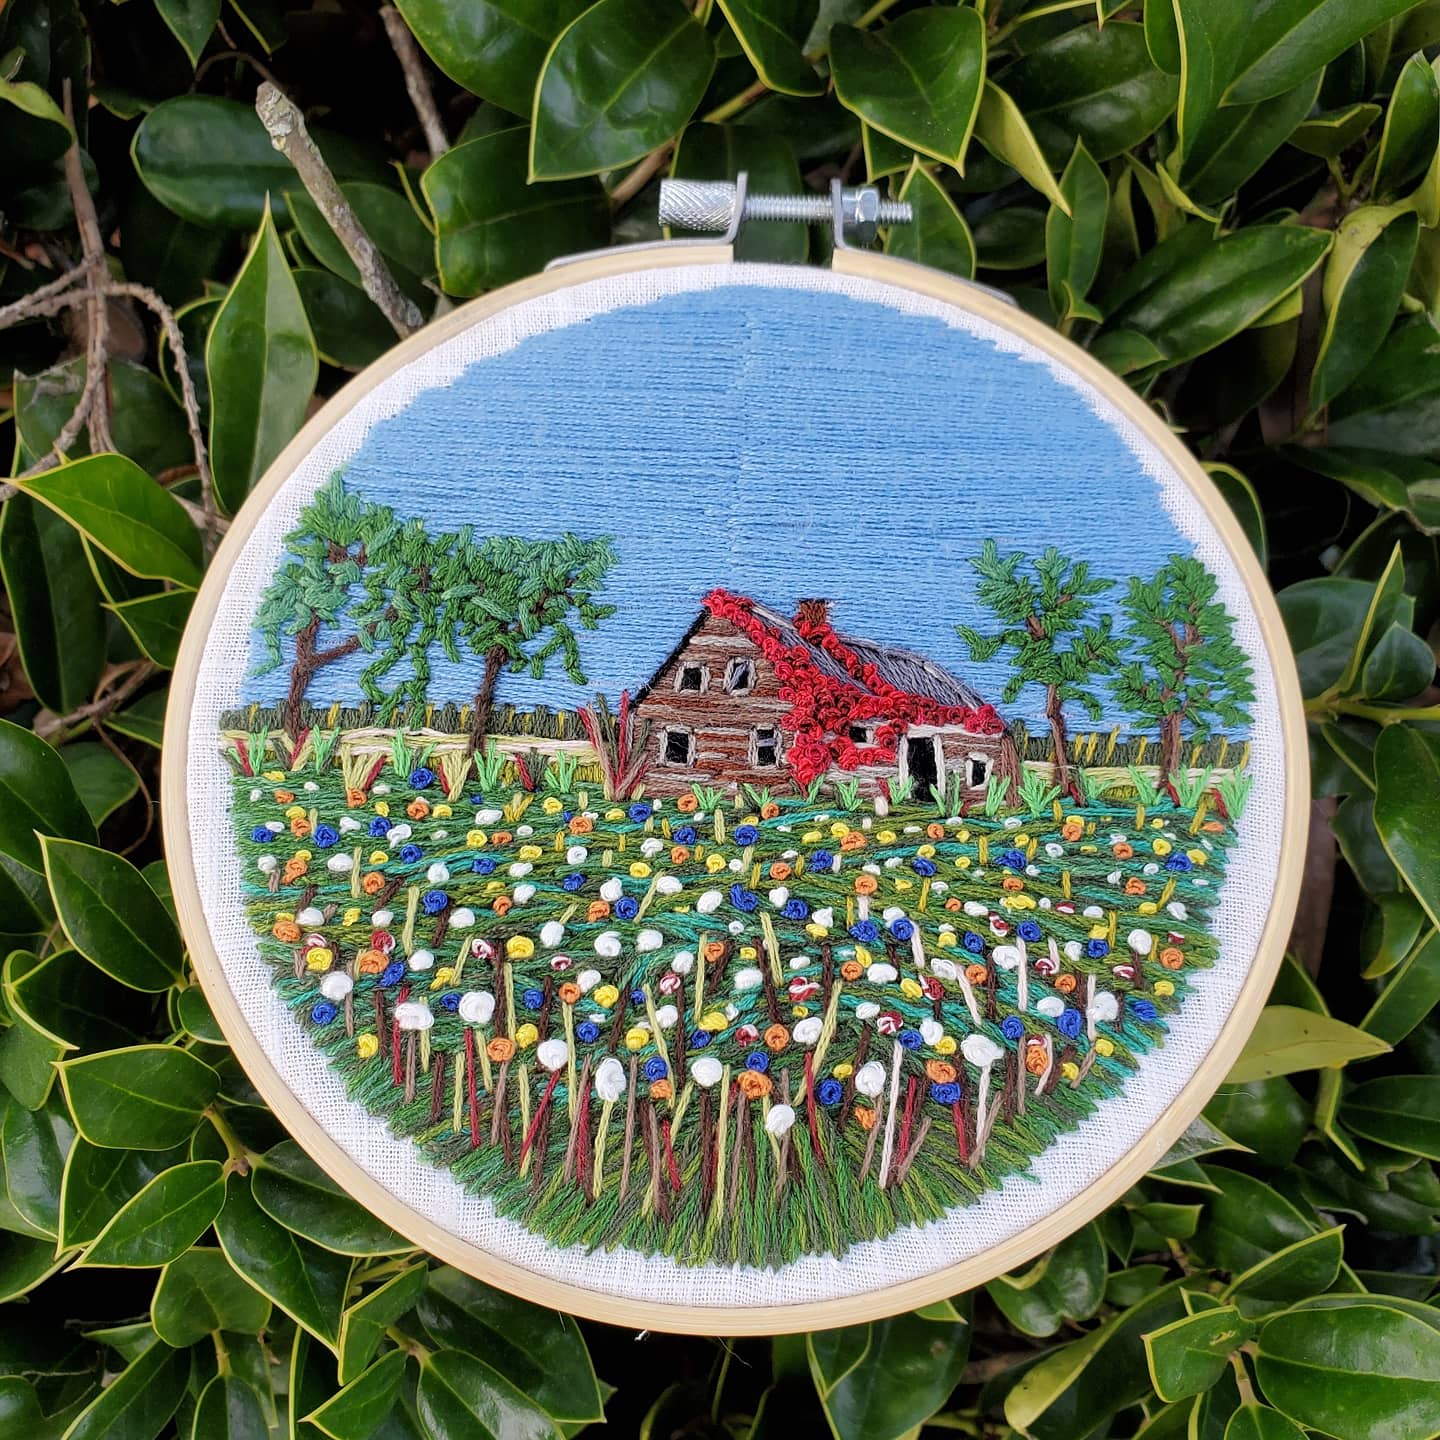 Freehand embroidery of an abandoned farm house in a field or wildflowers